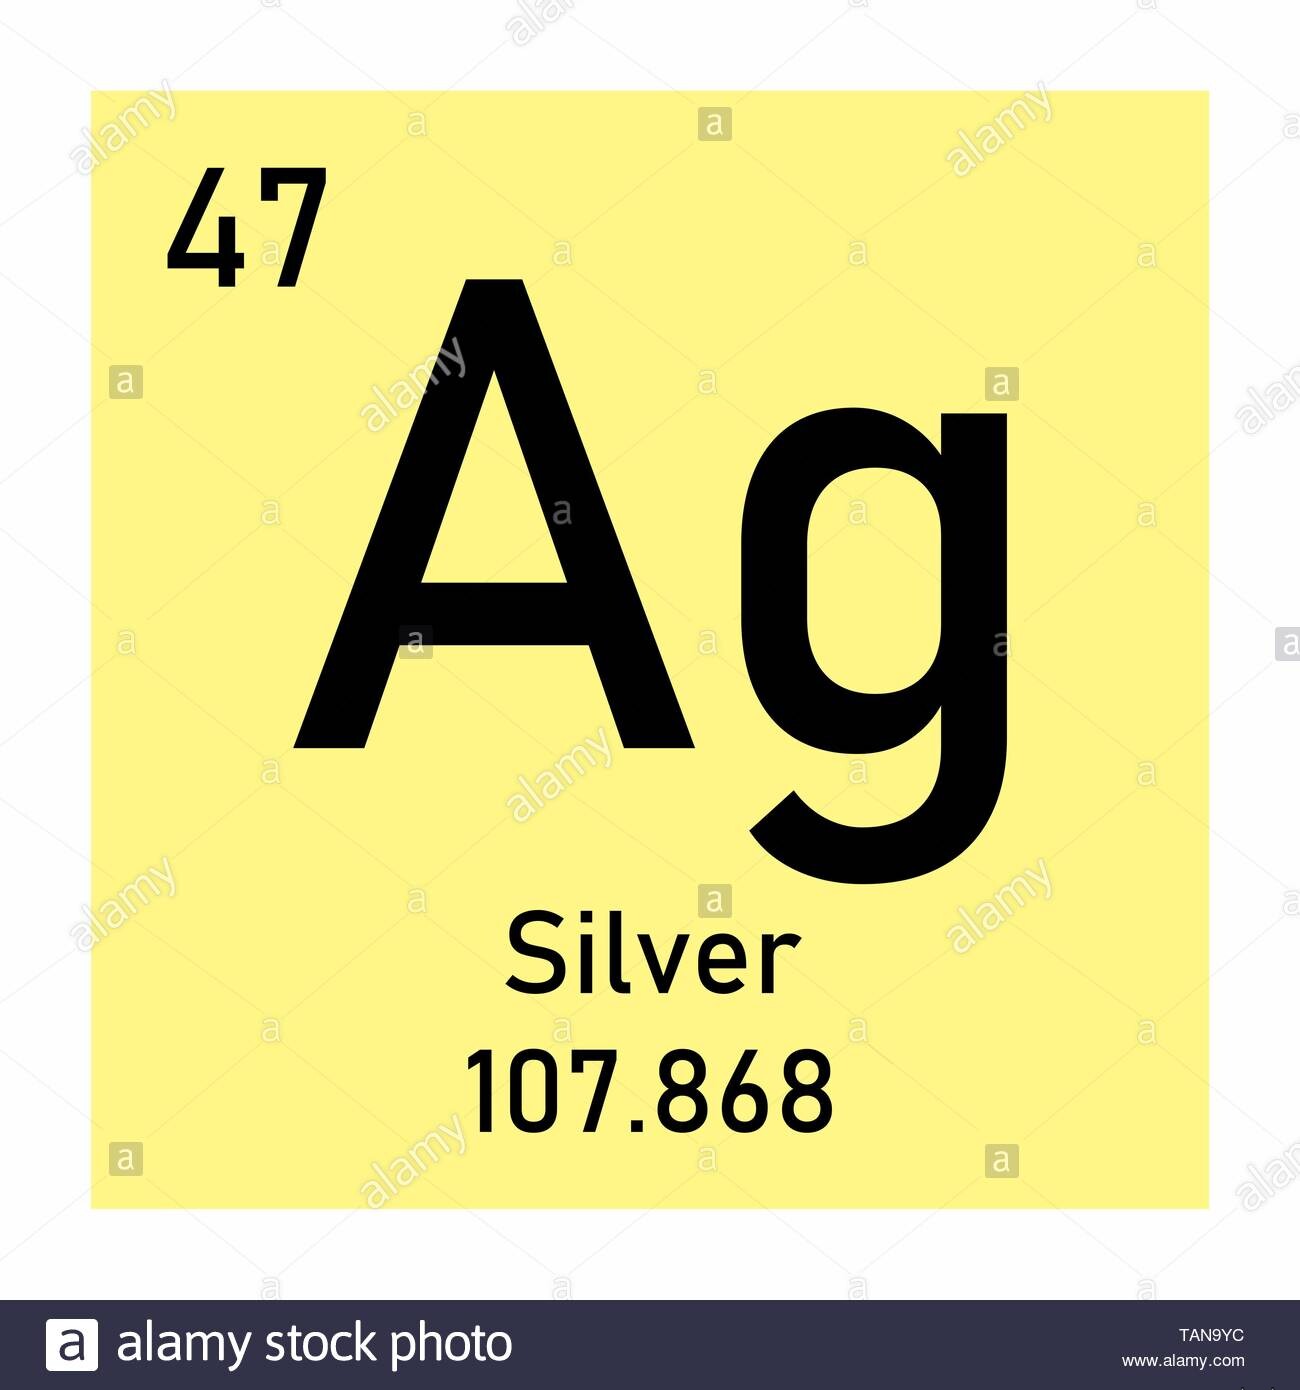 what is the chemical symbol for silver?